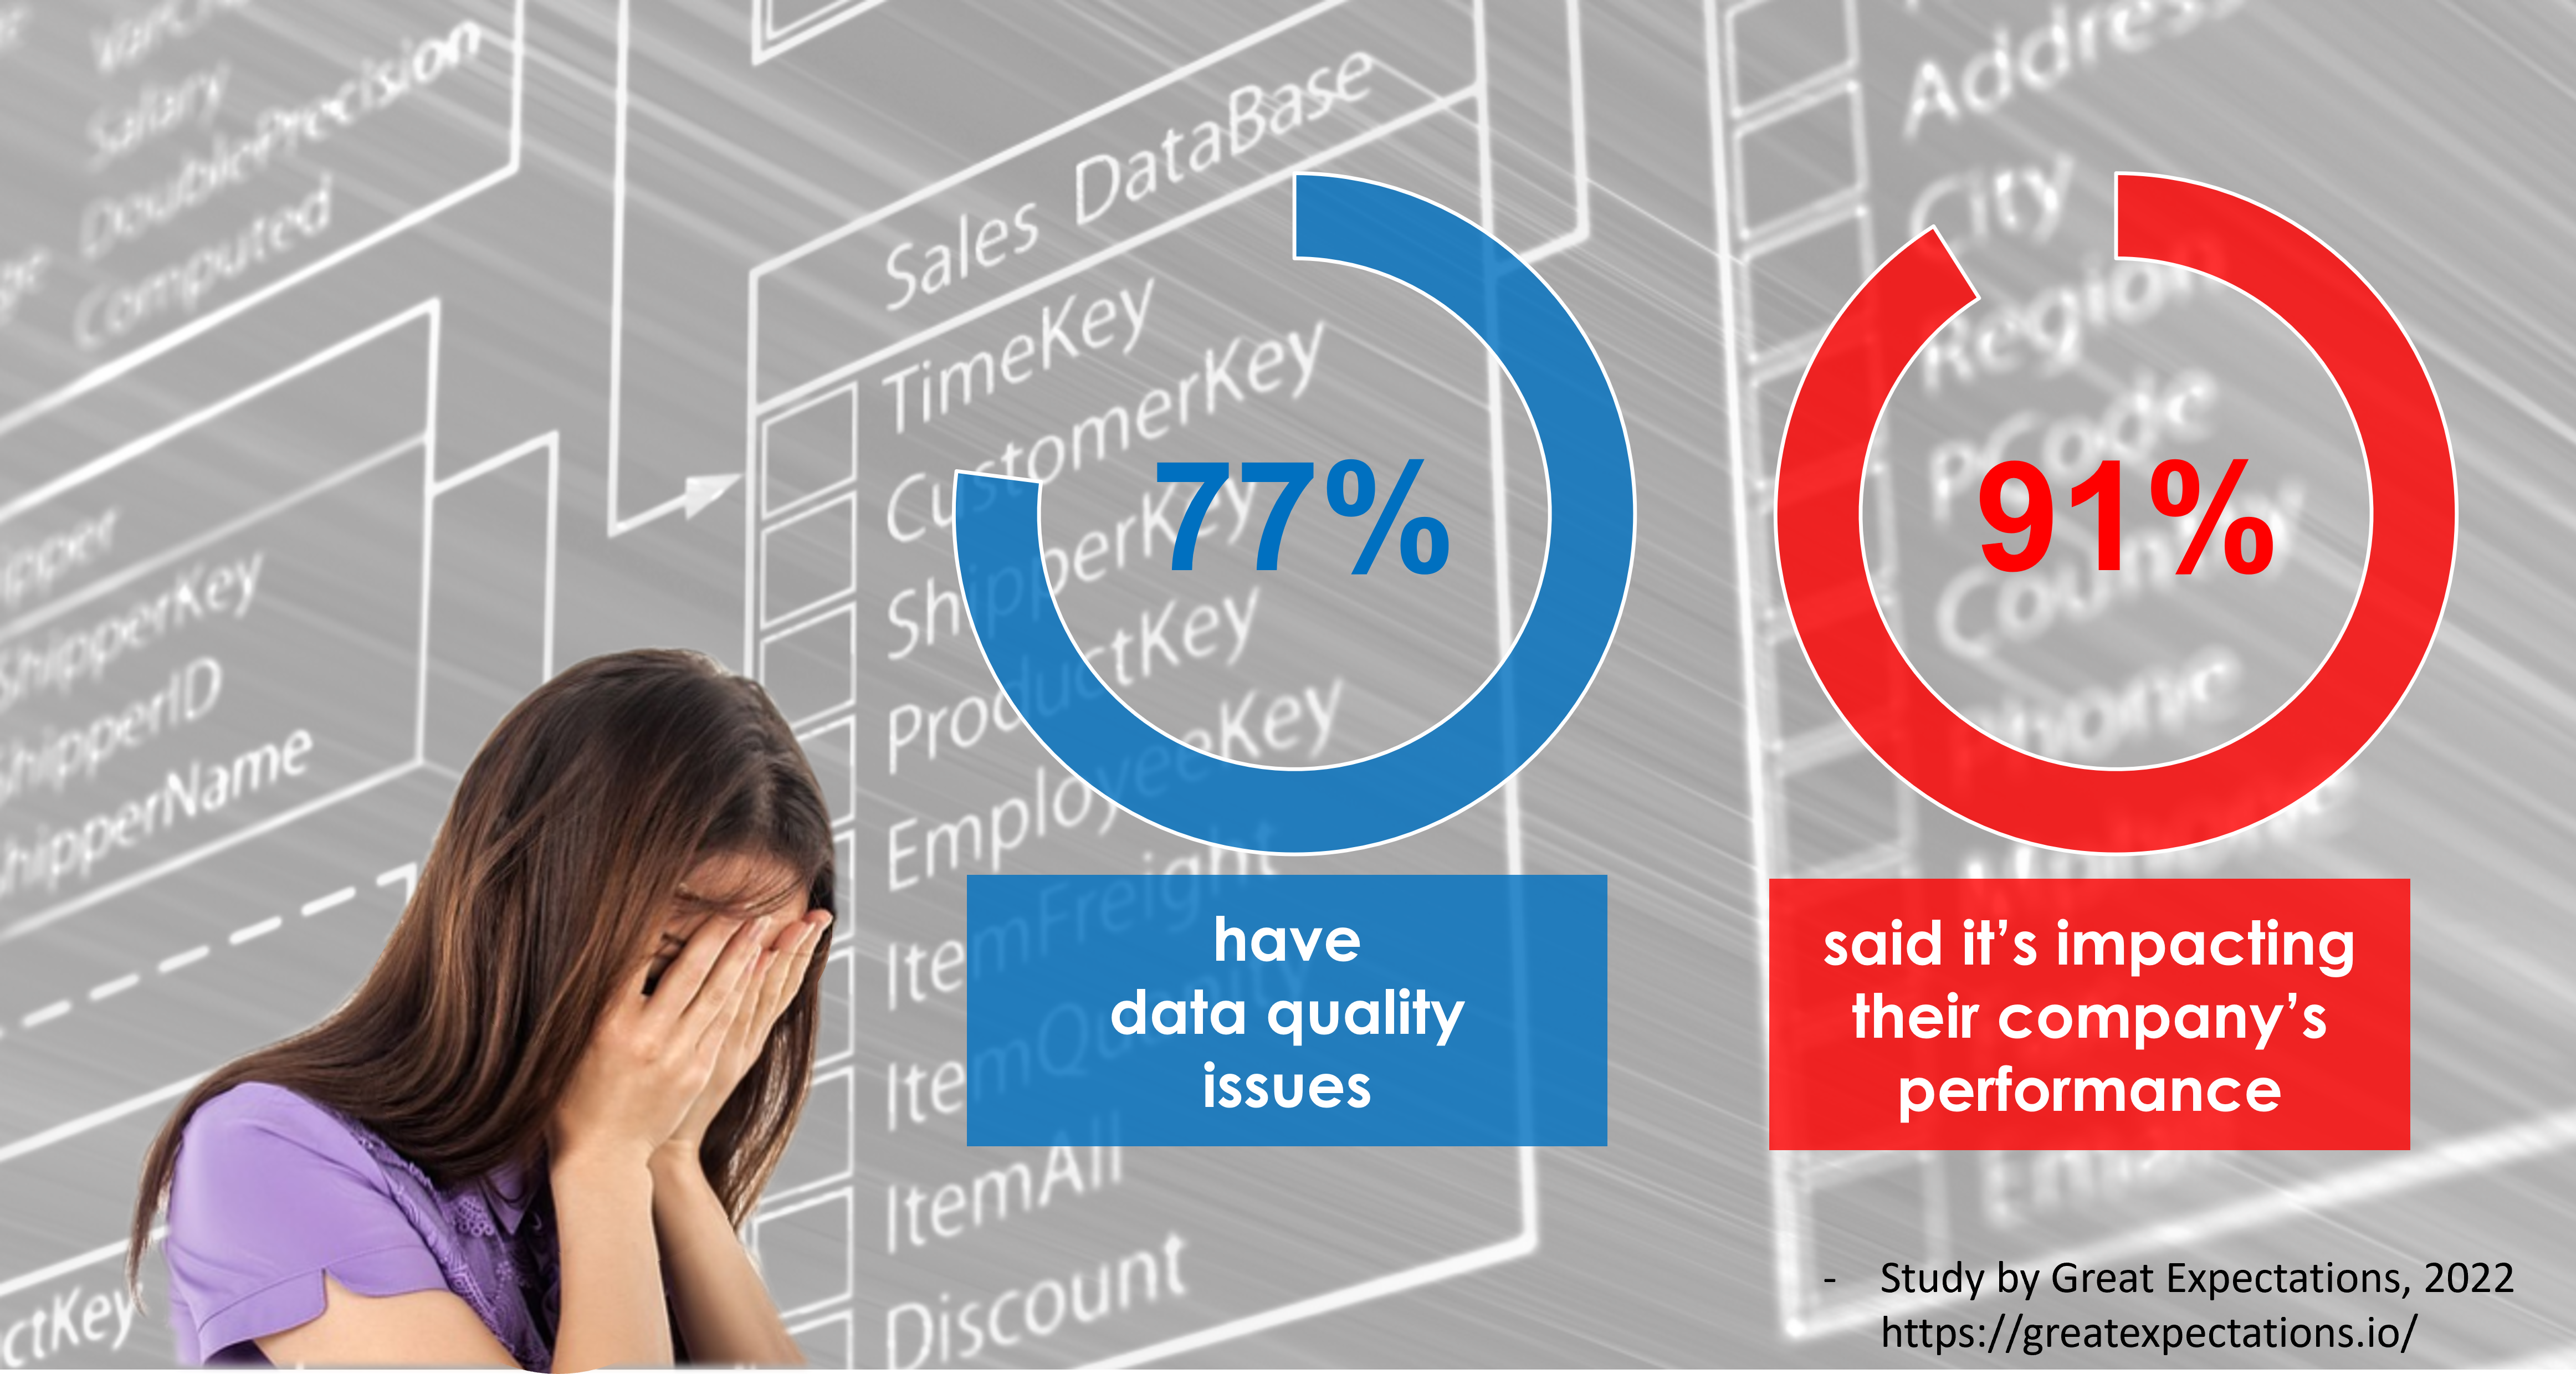 data integrity: 77% have data quality issues, 91% said it's impacting their company's performance